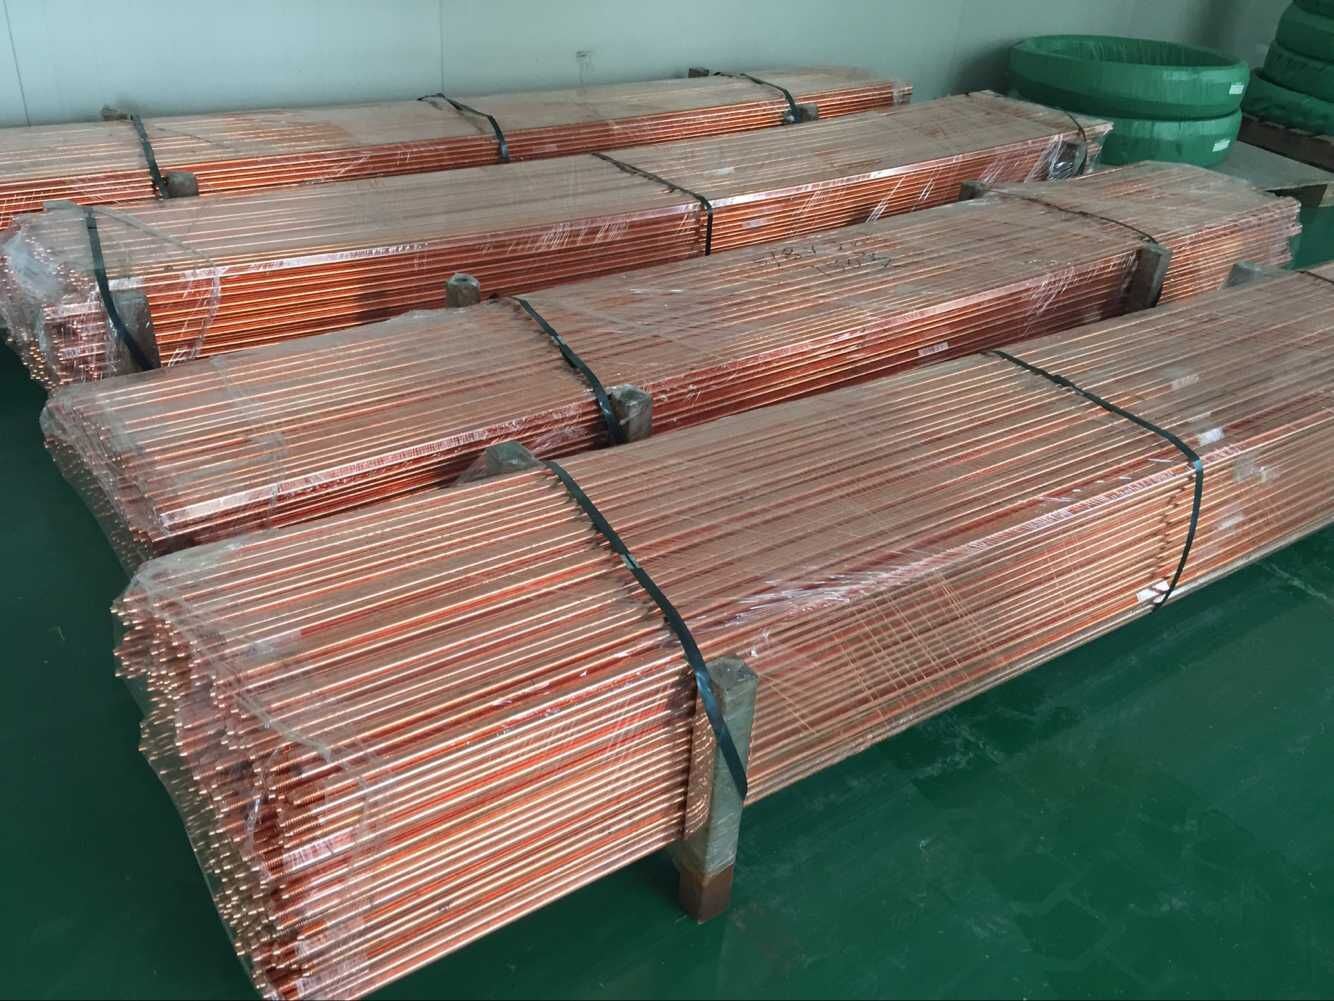 China top copper producer halts output after pollution order